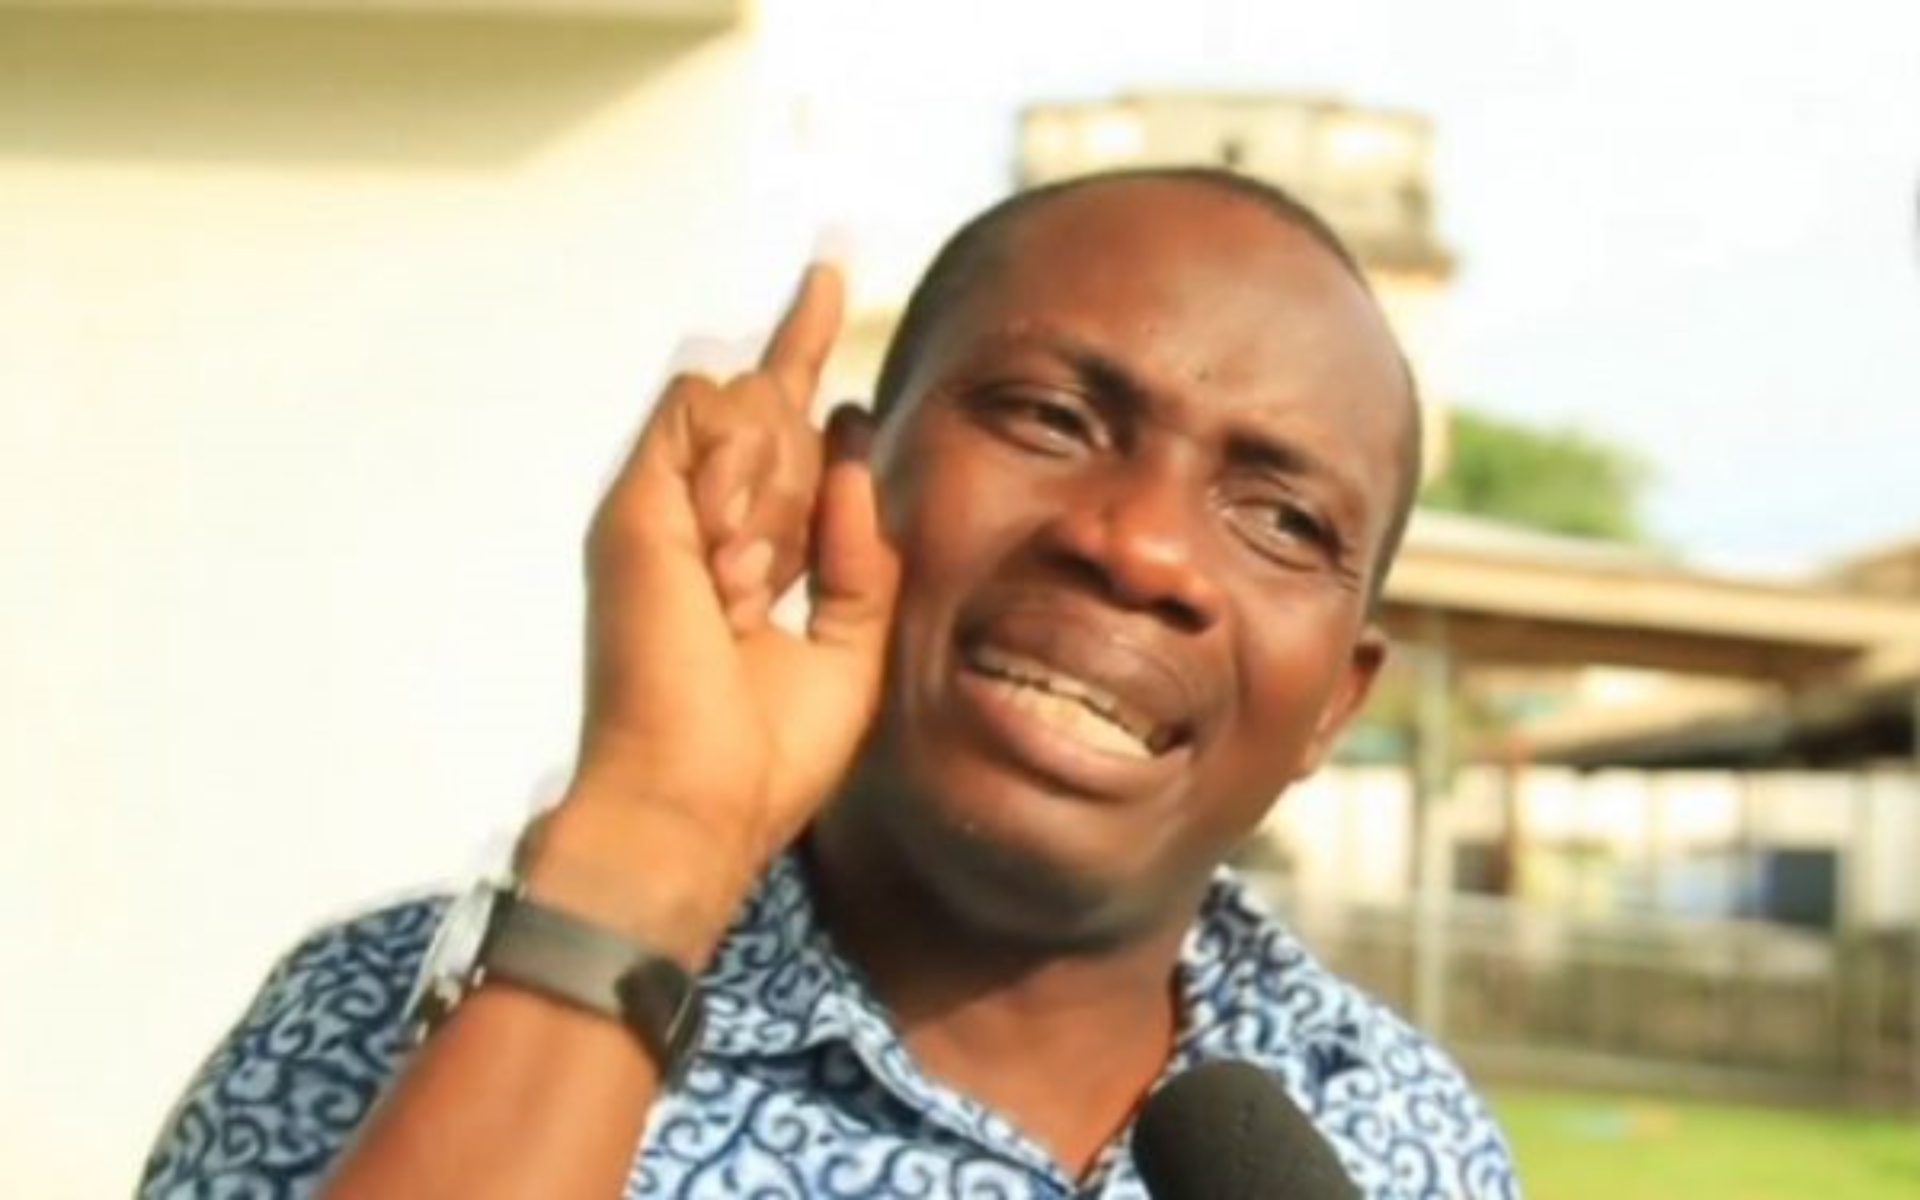 Looking for partners on TV Shows is prostitution glorified - Counsellor Lutterodt